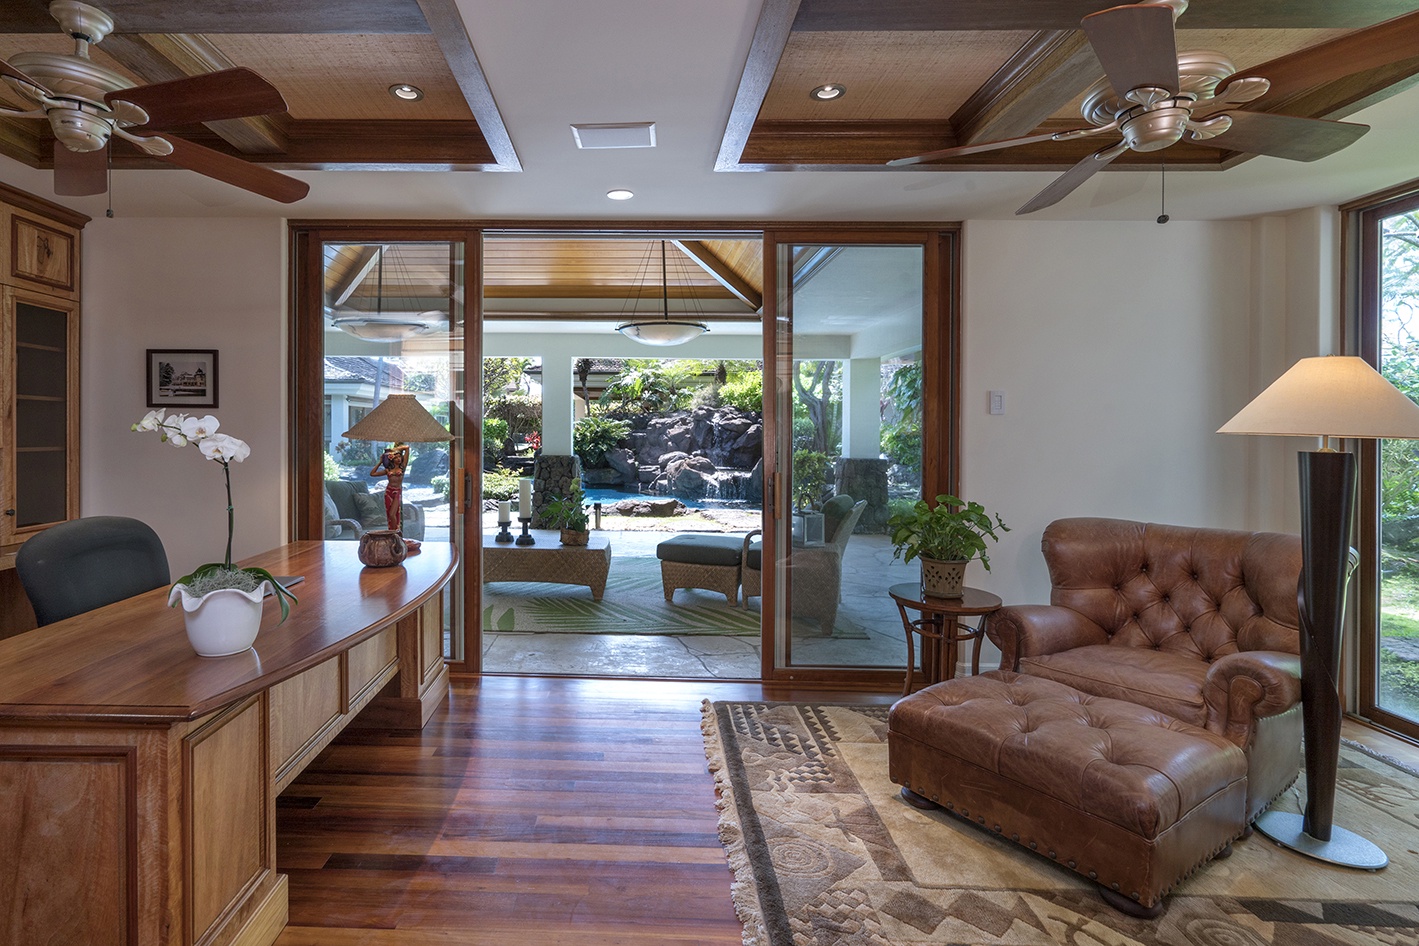 Kailua Vacation Rentals, Kailua's Kai Moena Estate - Main house: Front office great for scheduling meetings.